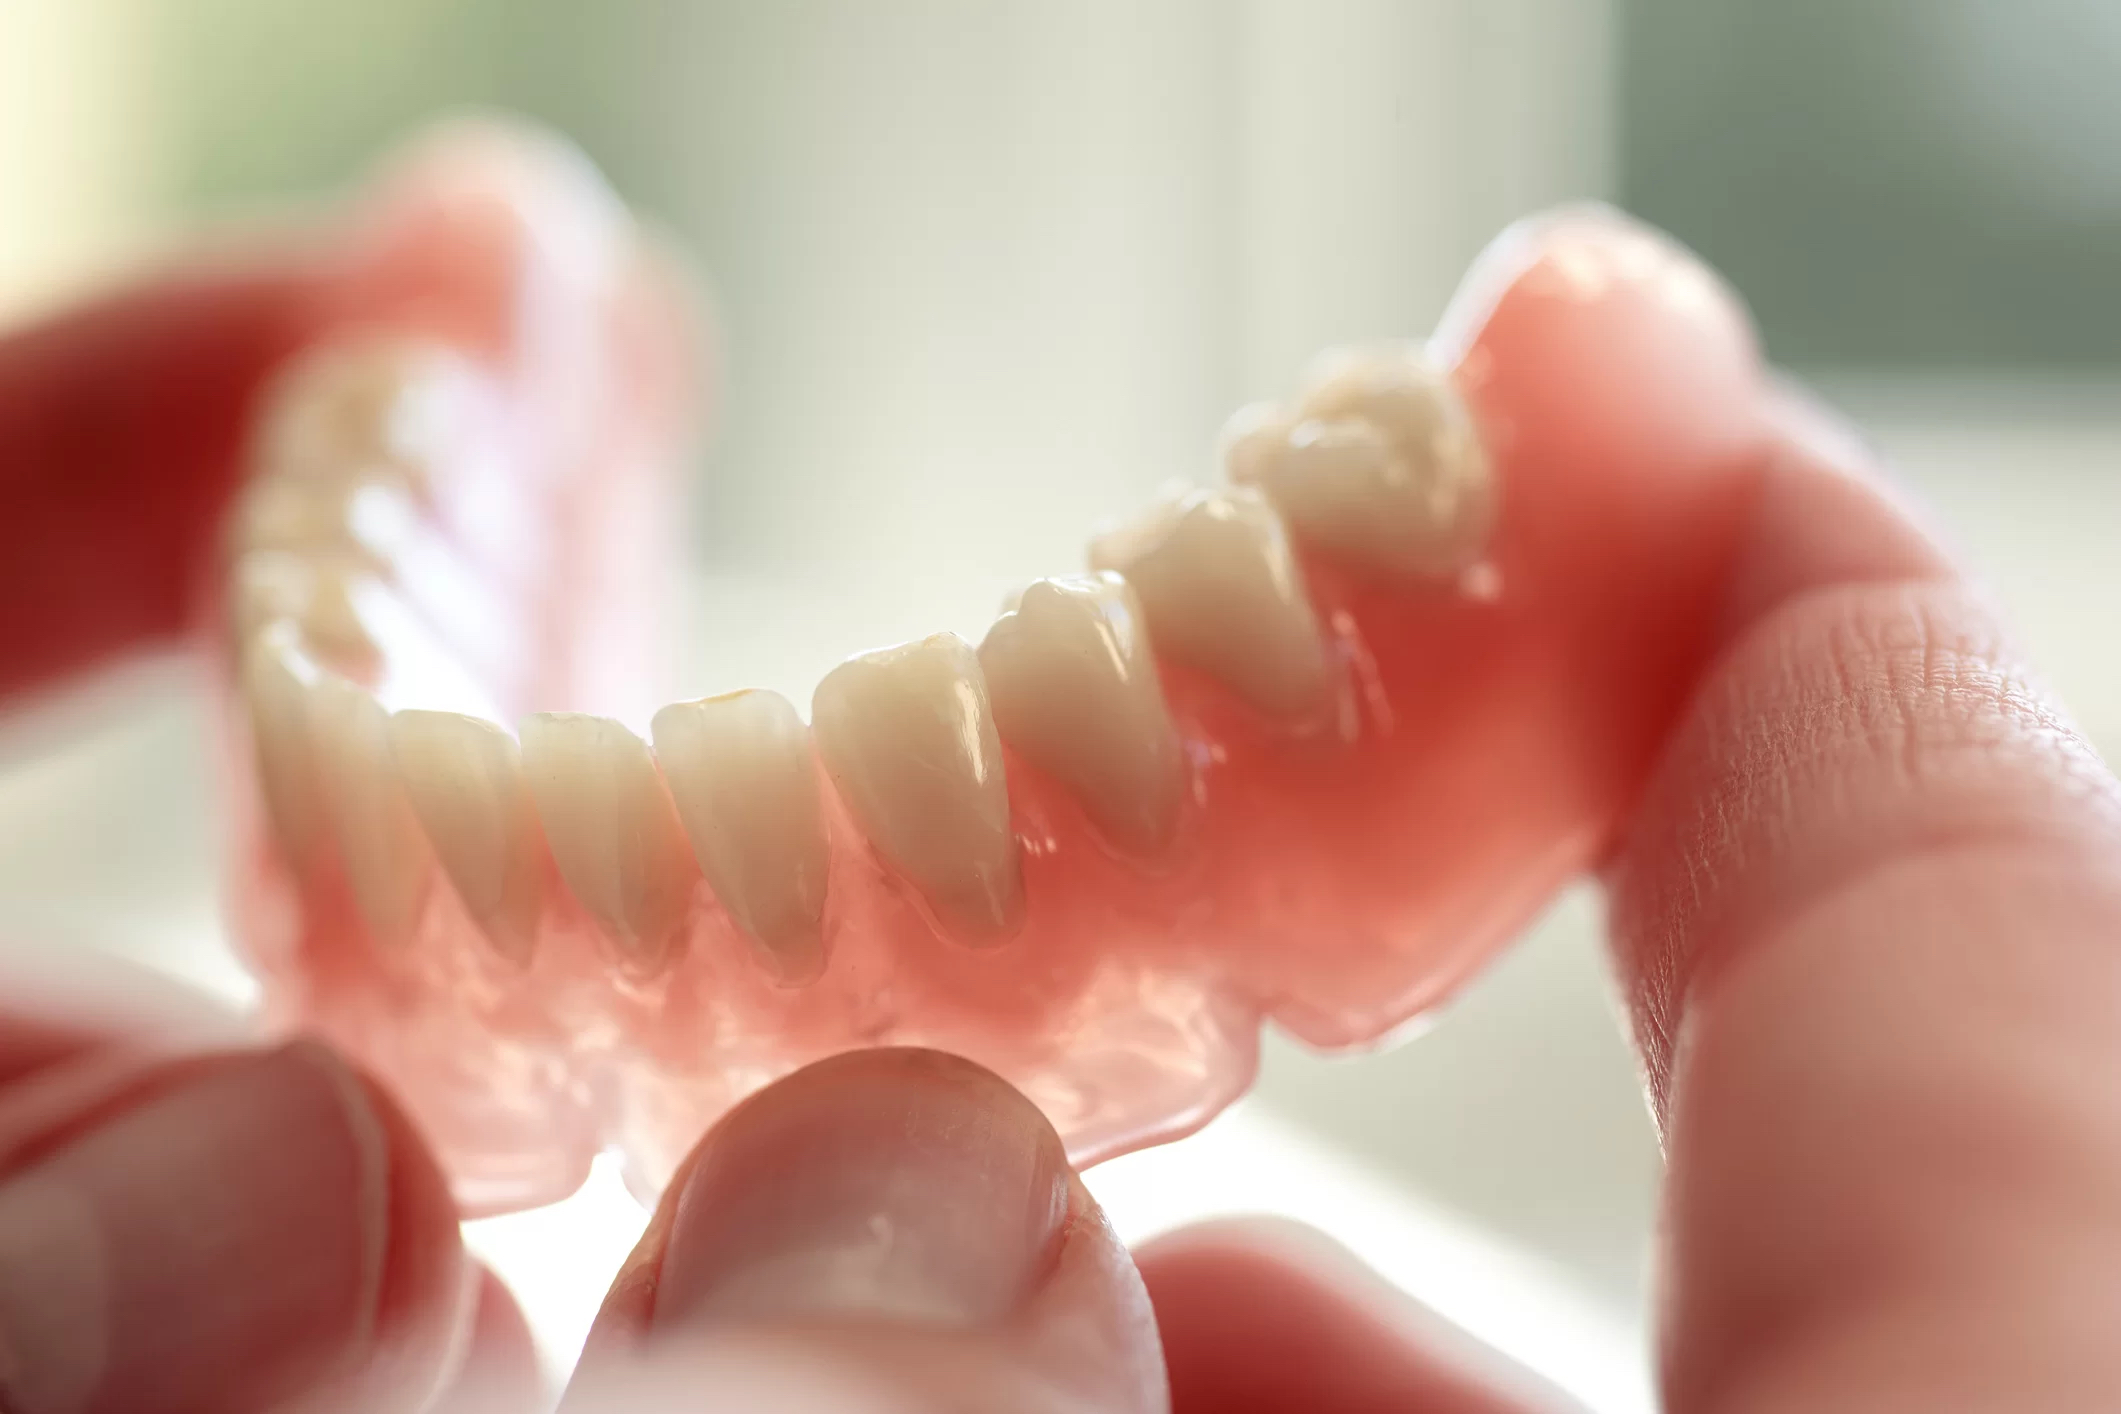 Do I Need Dentures? — What Are My Alternatives?